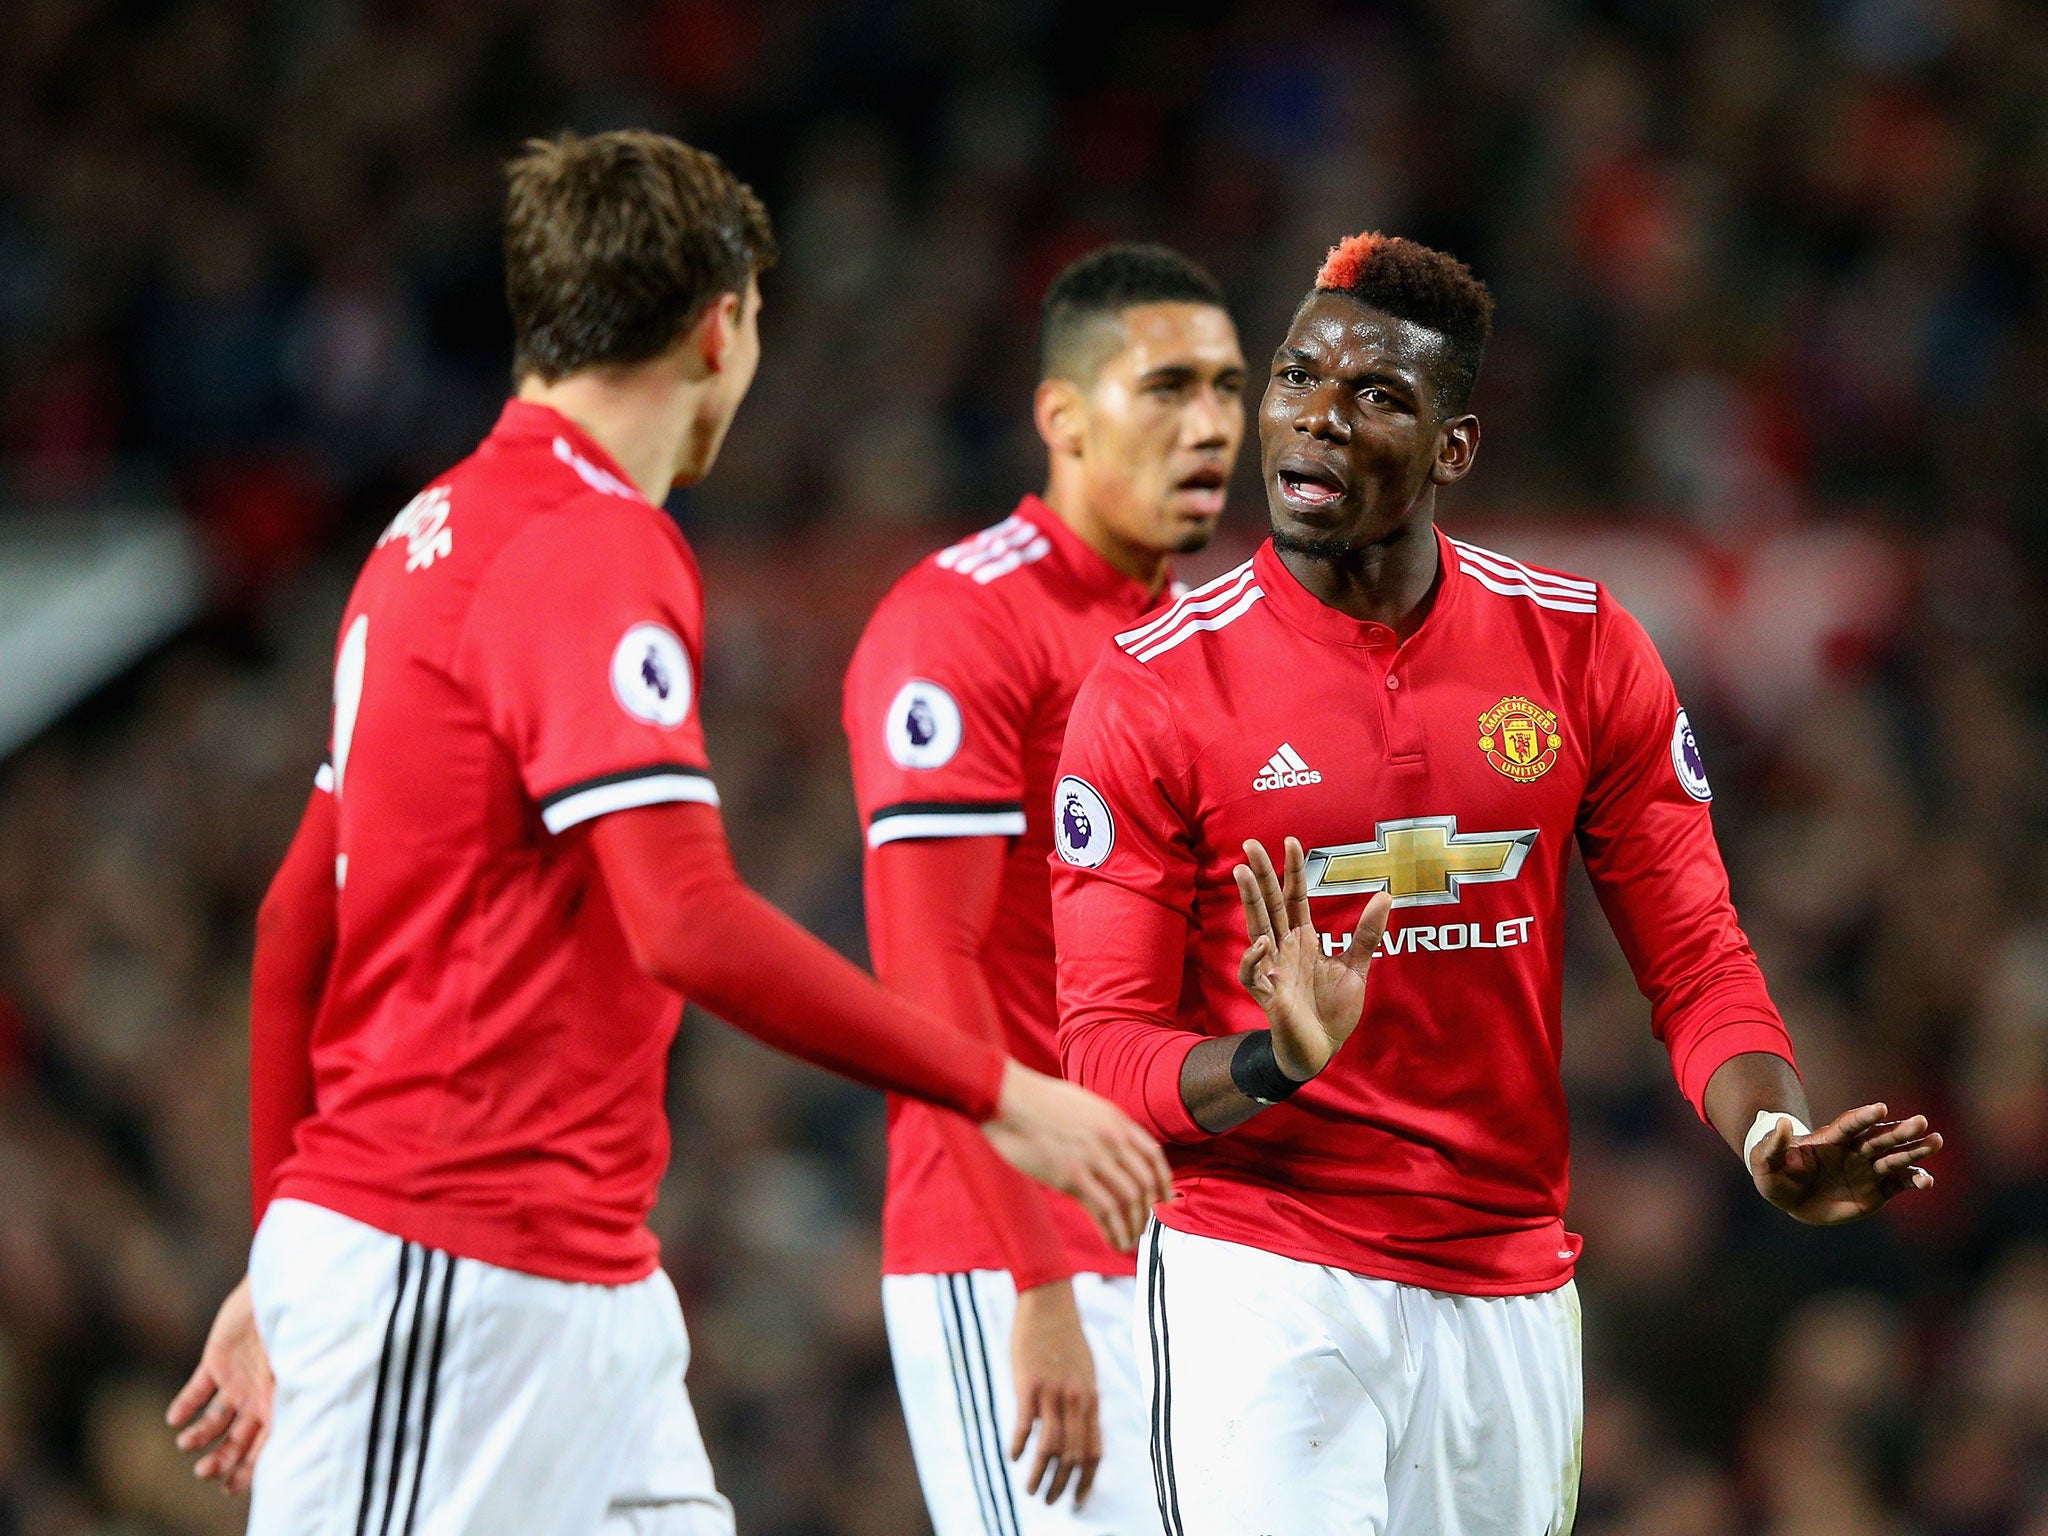 United will be looking to bounce back from their midweek defeat by Basel